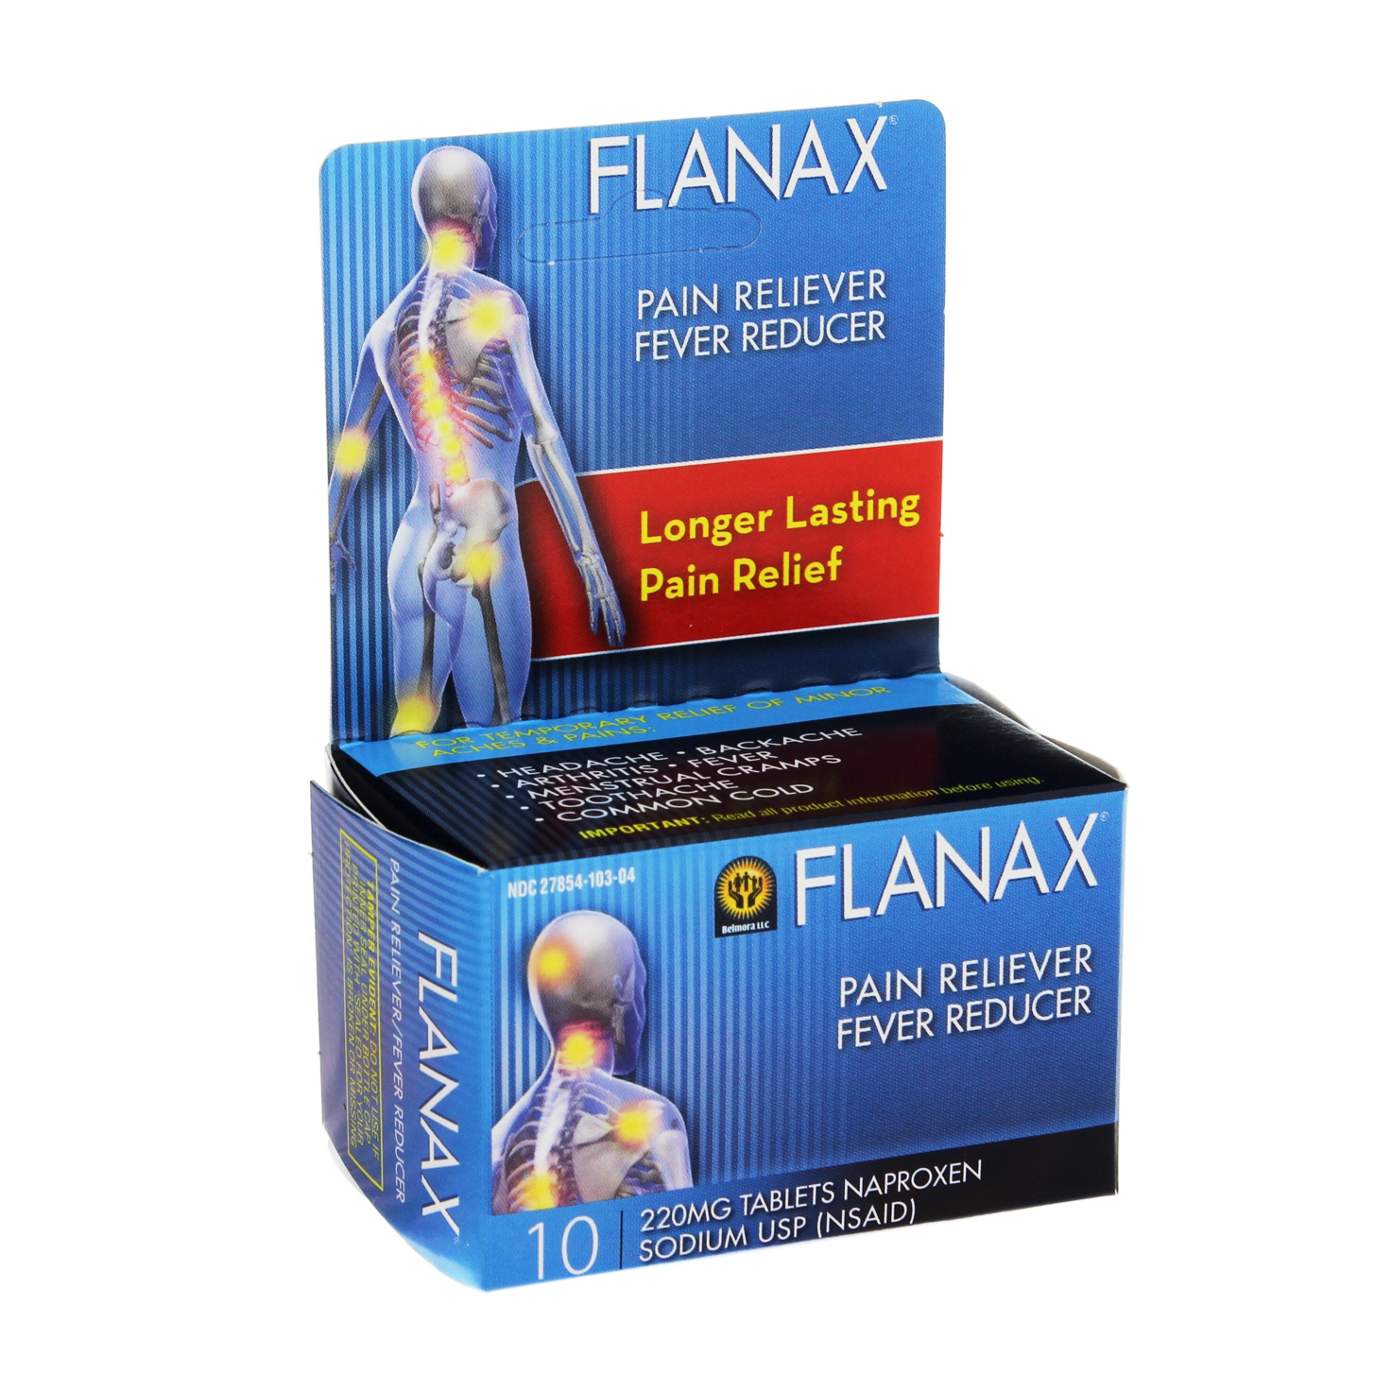 Flanax Naproxen Sodium 220 mg Pain Reliever/Fever Reducer Tablets; image 1 of 2